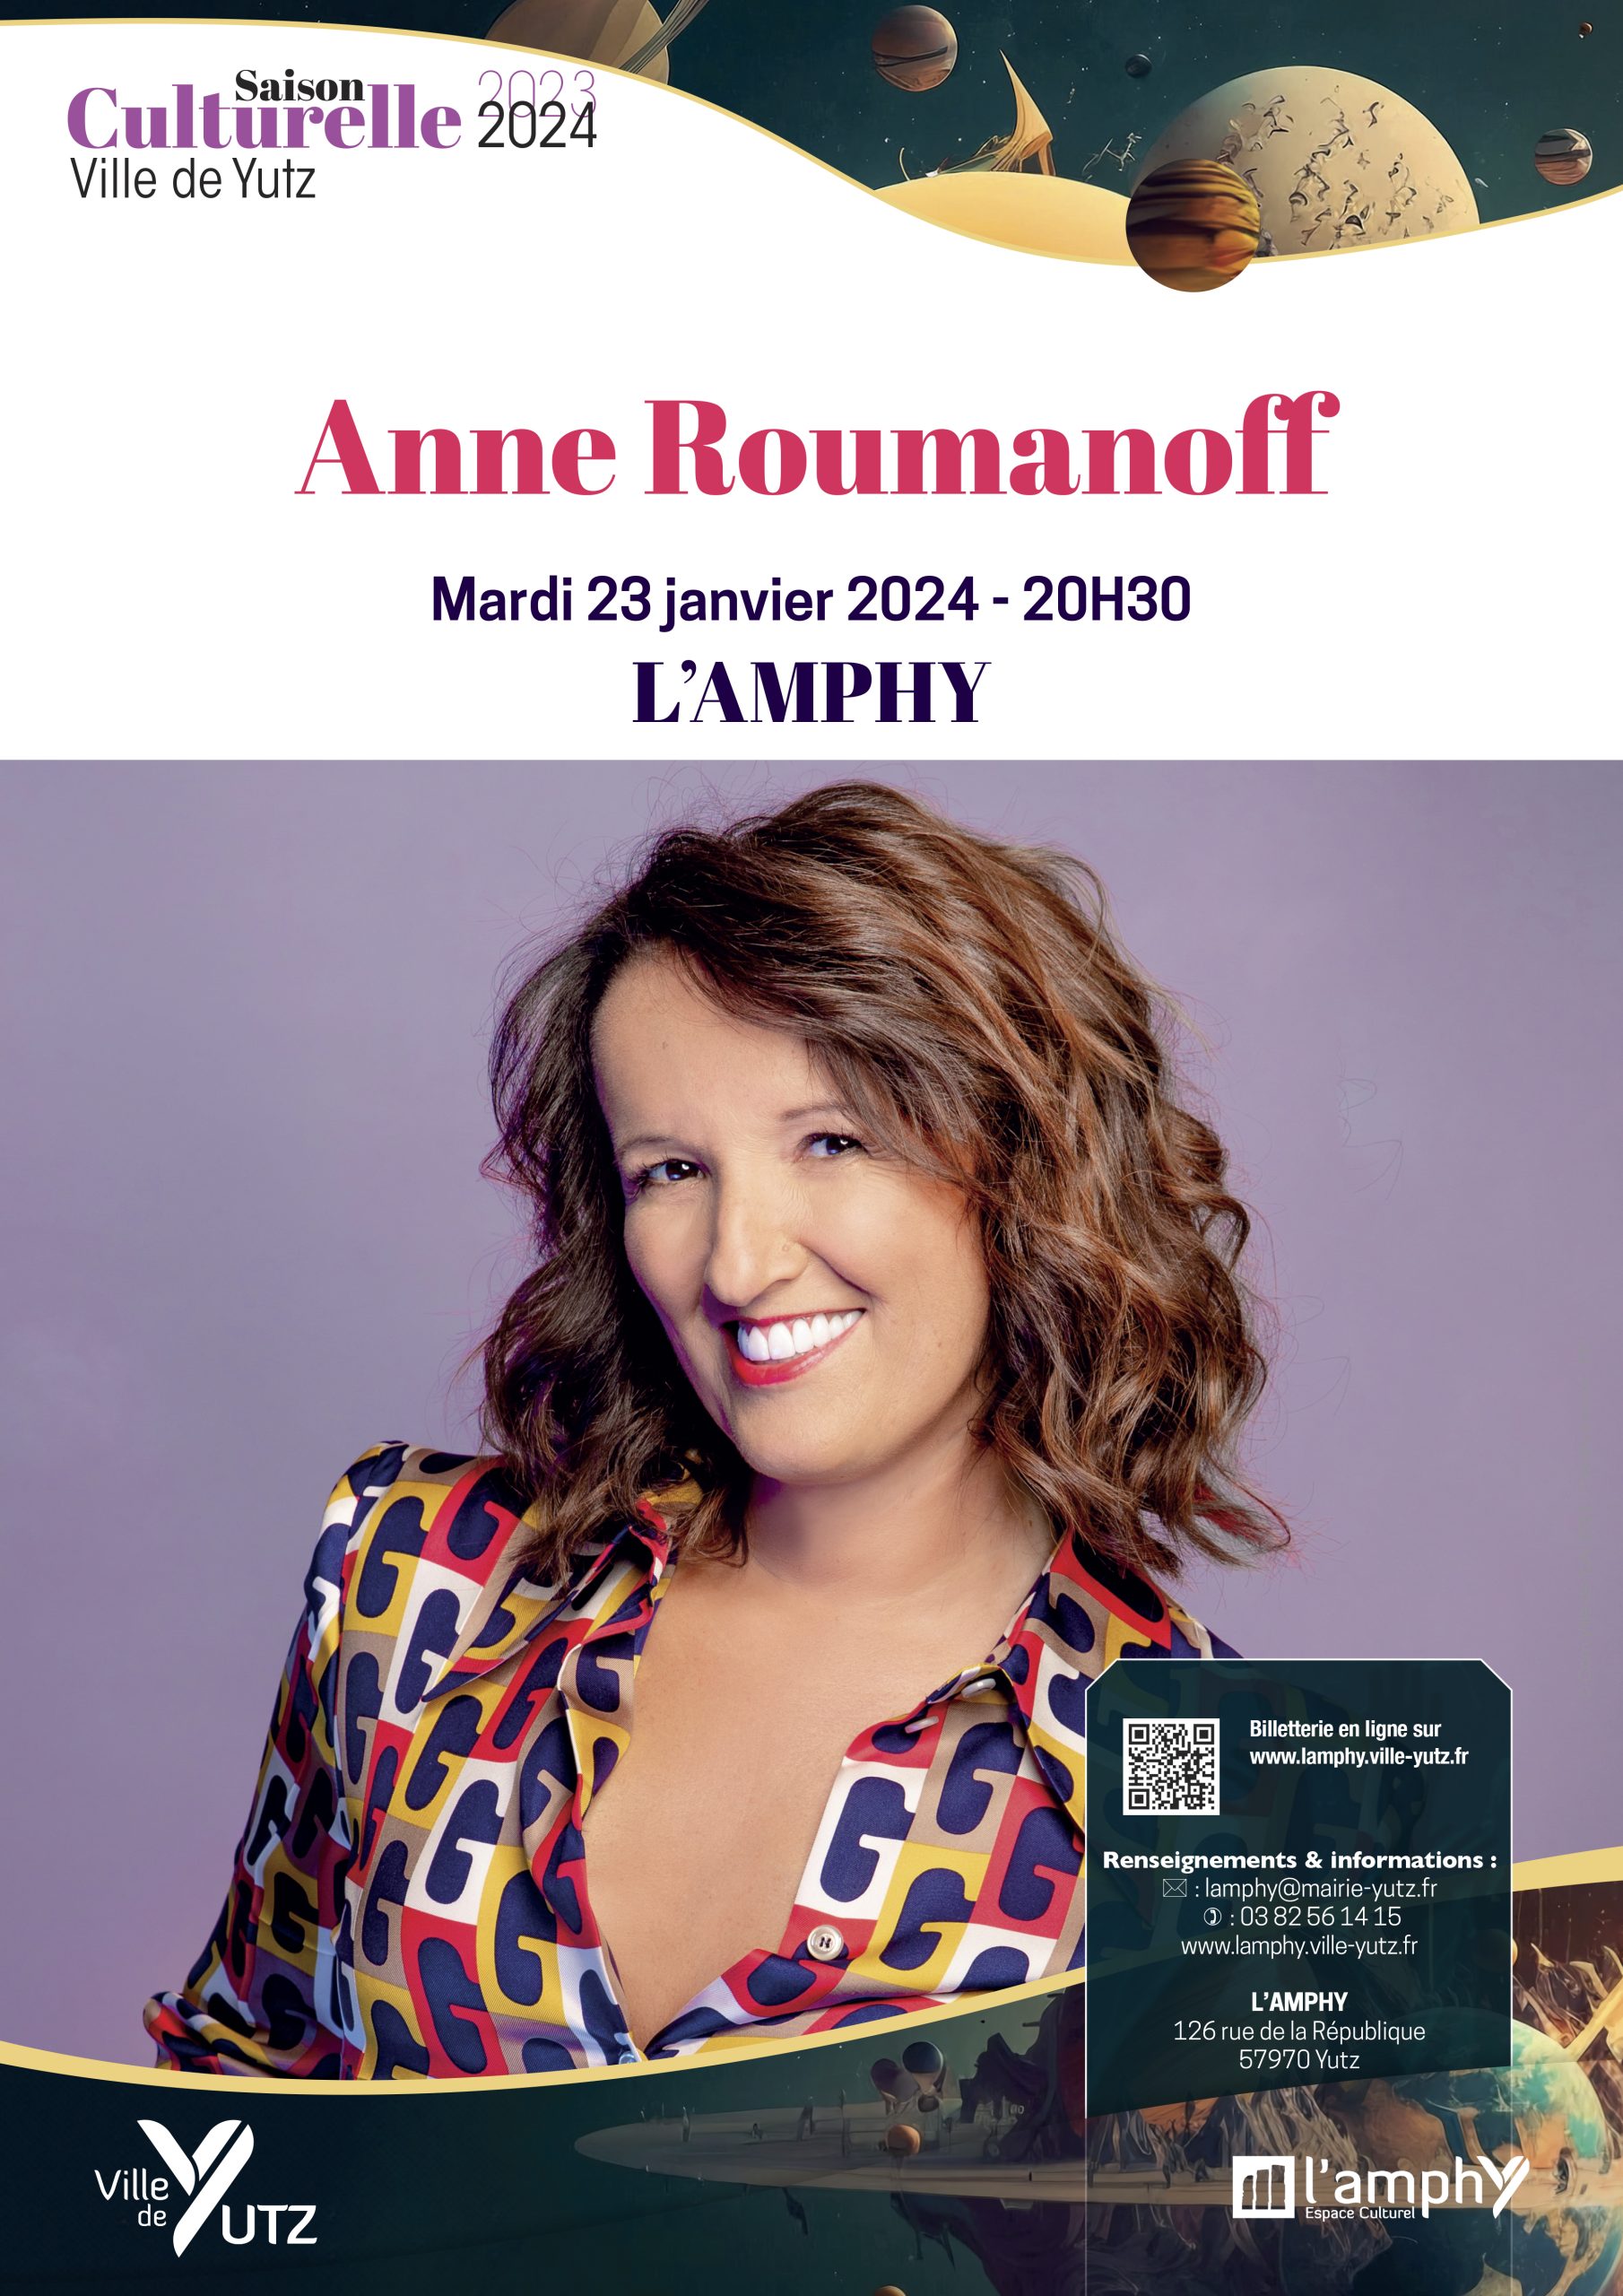 Spectacle d'humour : Anne roumanoff